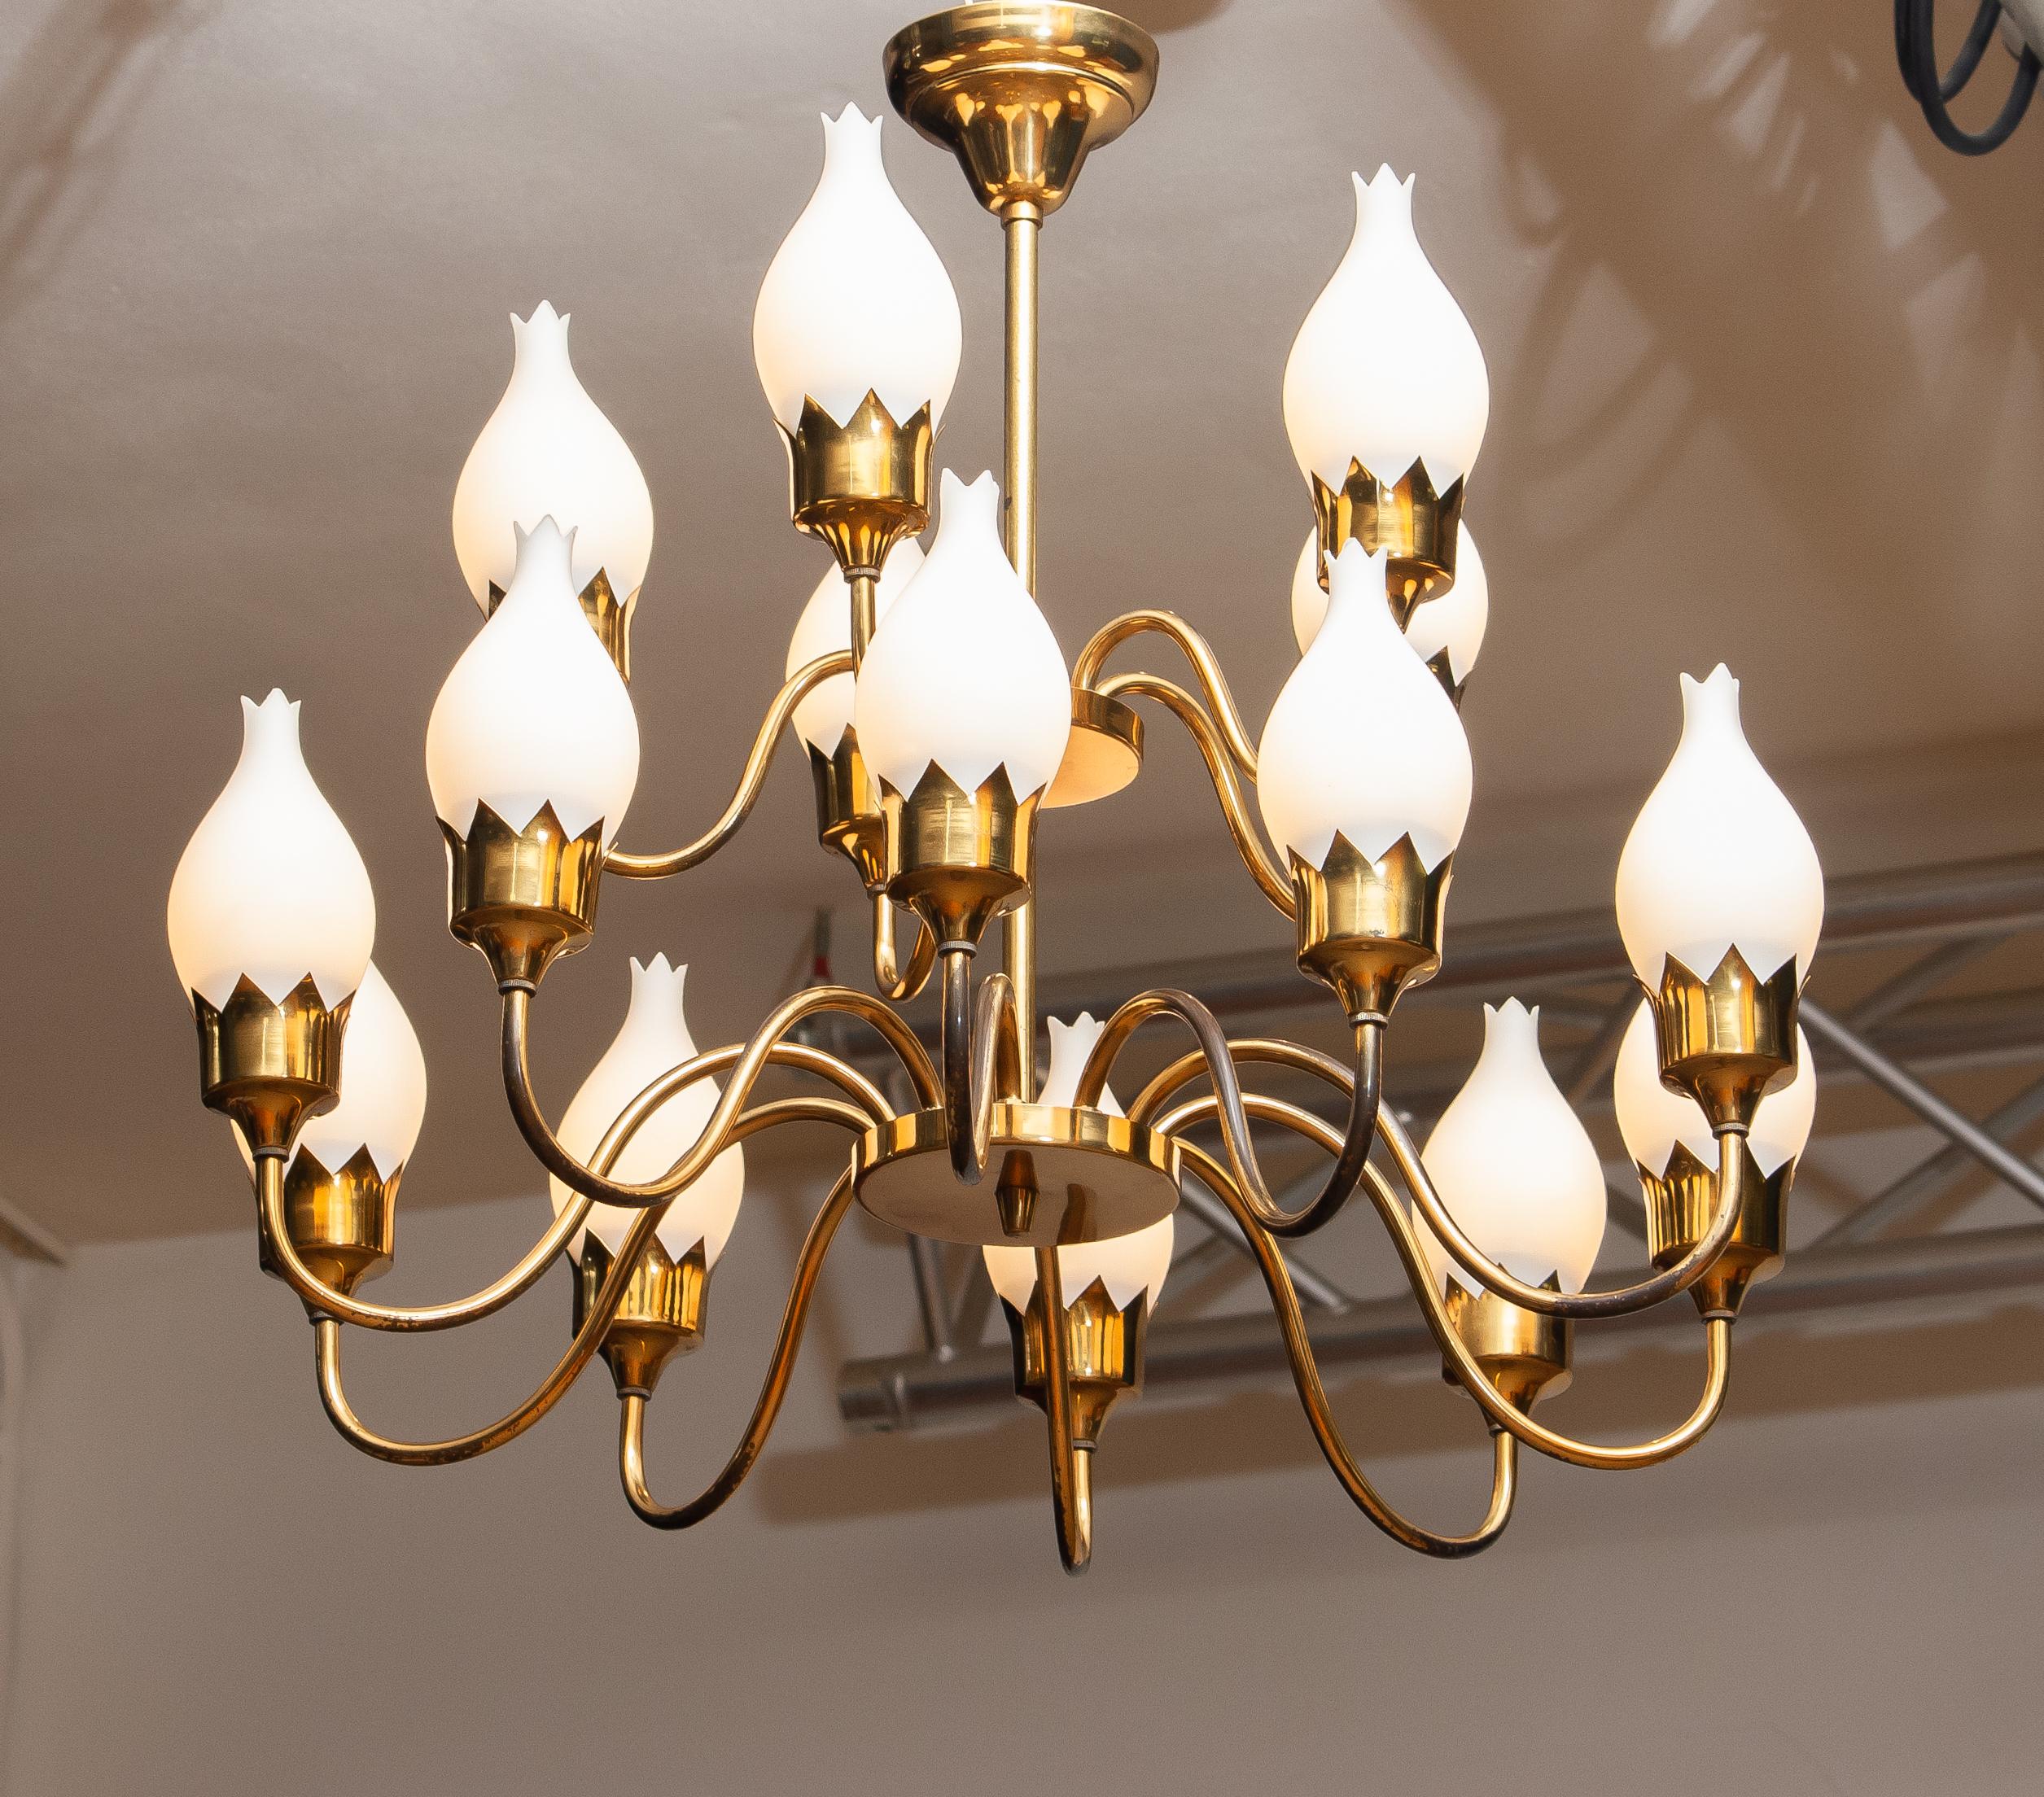 Mid-Century Modern 1950s, Brass and White Glass Opaline Arm Chandelier by Fog & Mørup with Tulips